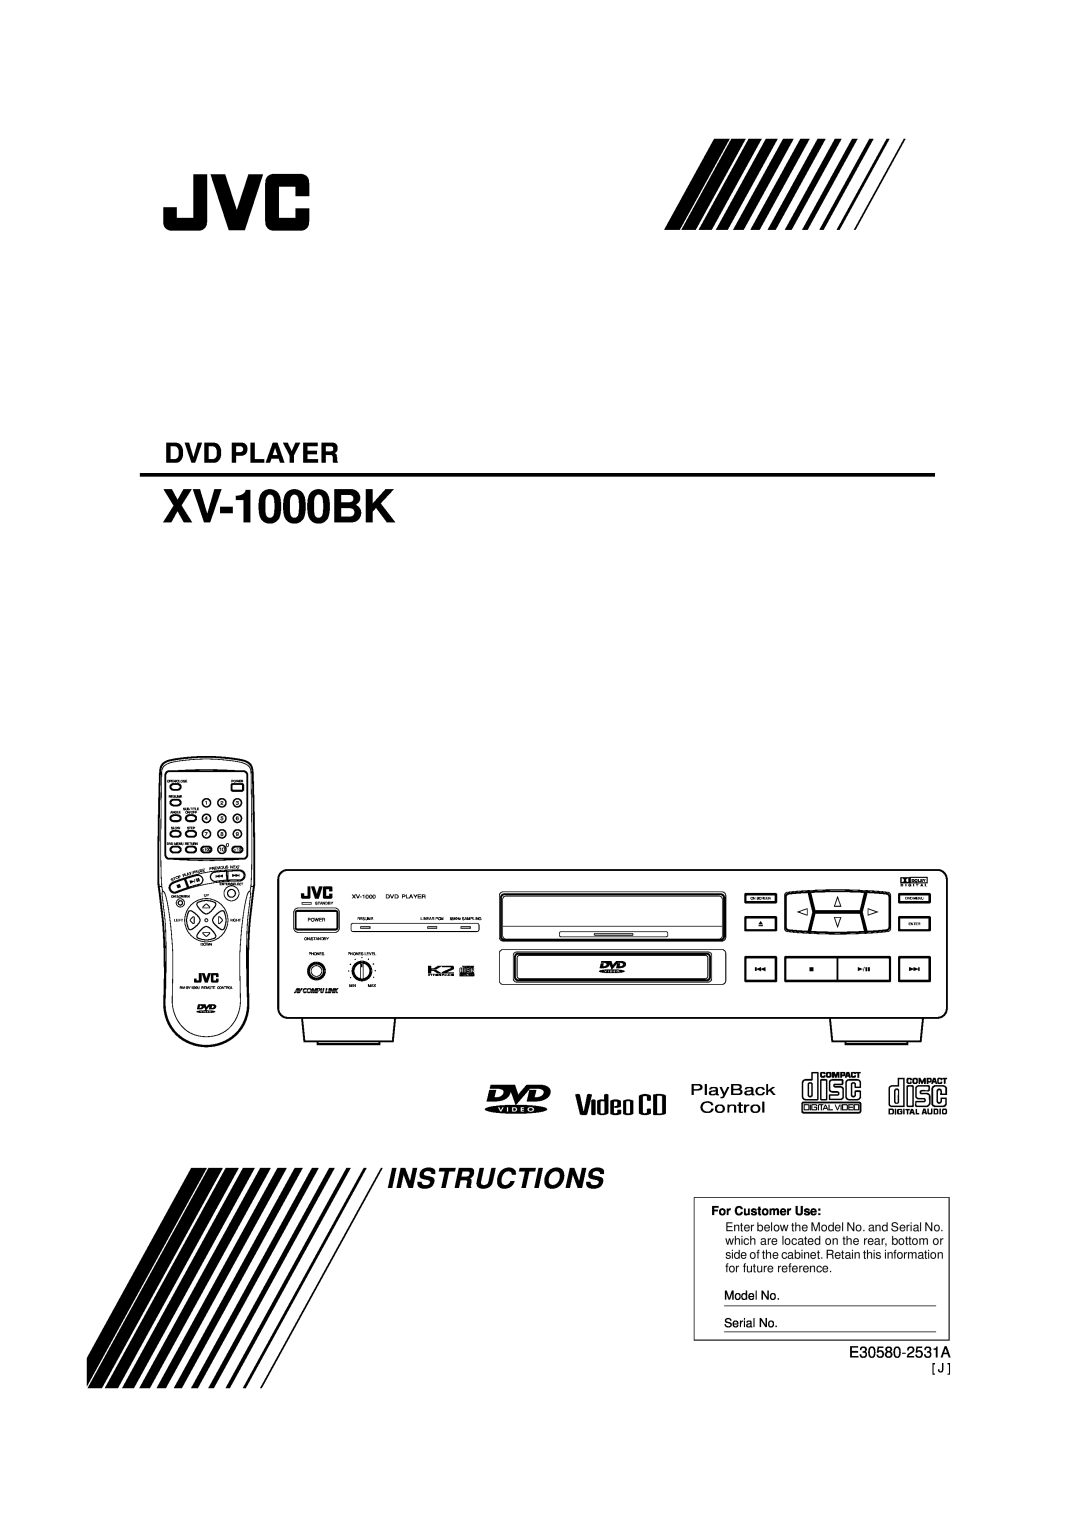 JVC XV-1000BK manual Dvd Player, Instructions, PlayBack, Control, E30580-2531A, For Customer Use 